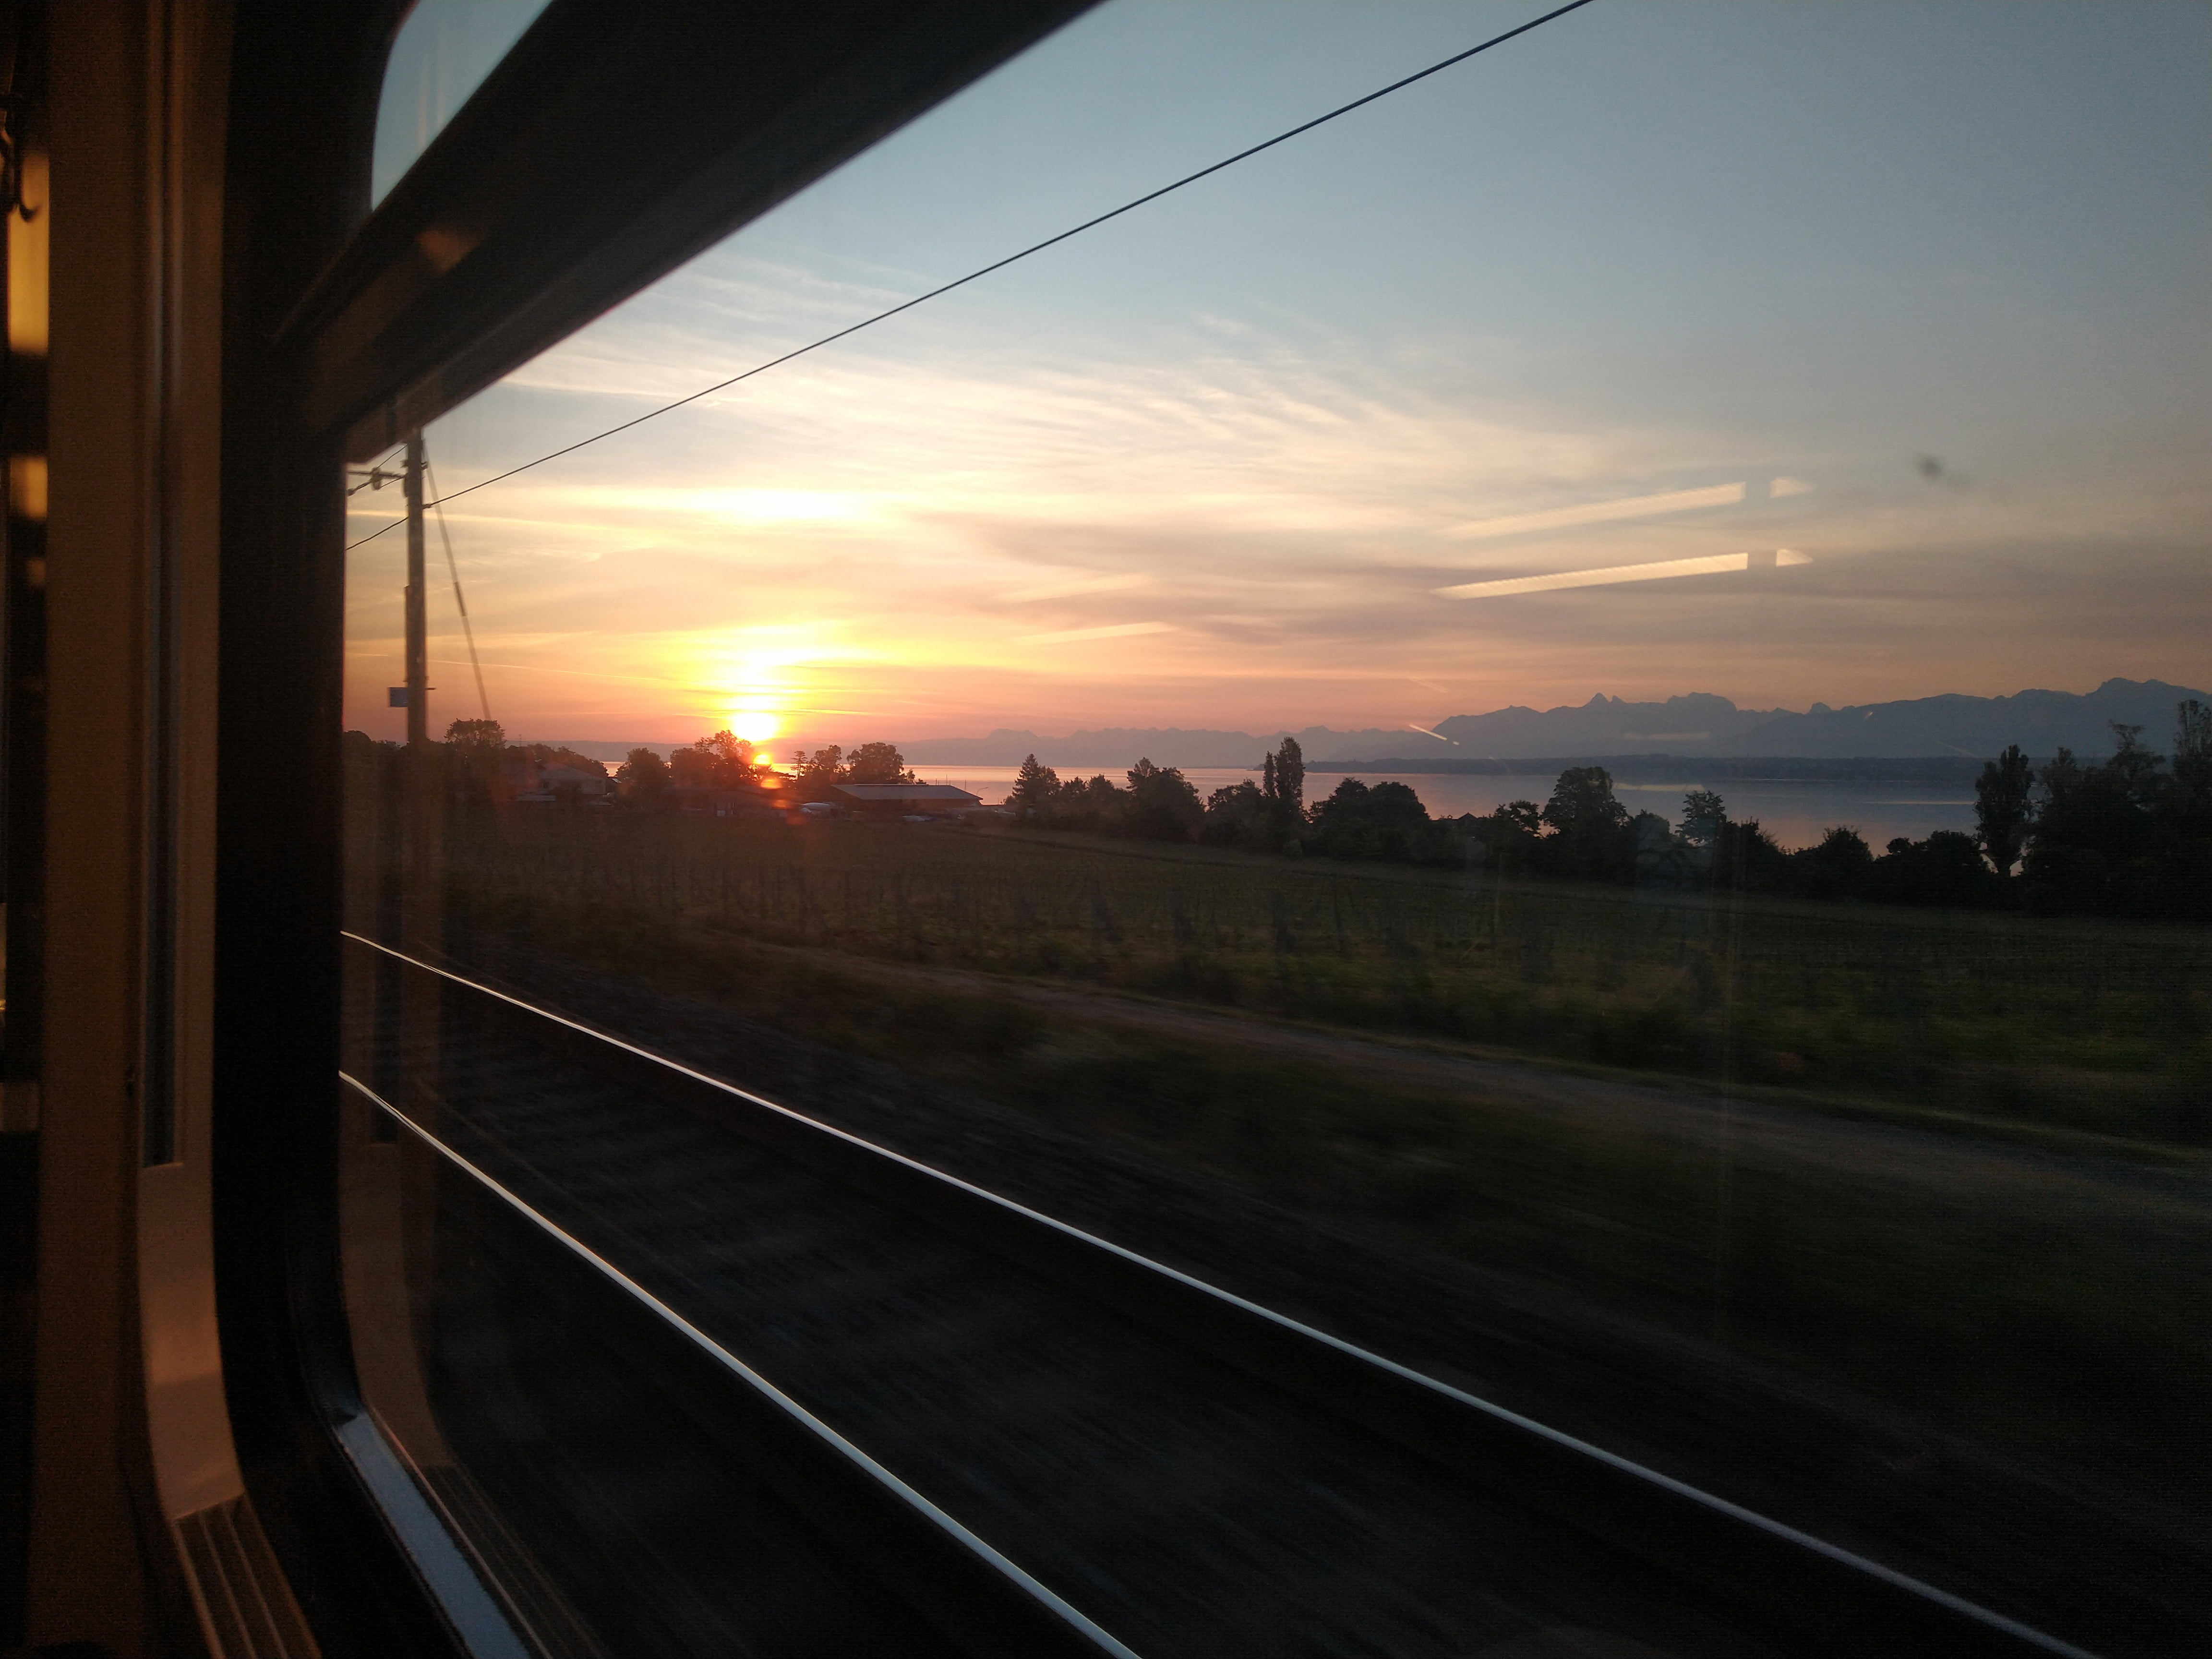 Watching the sunrise over Lac Léman from the train